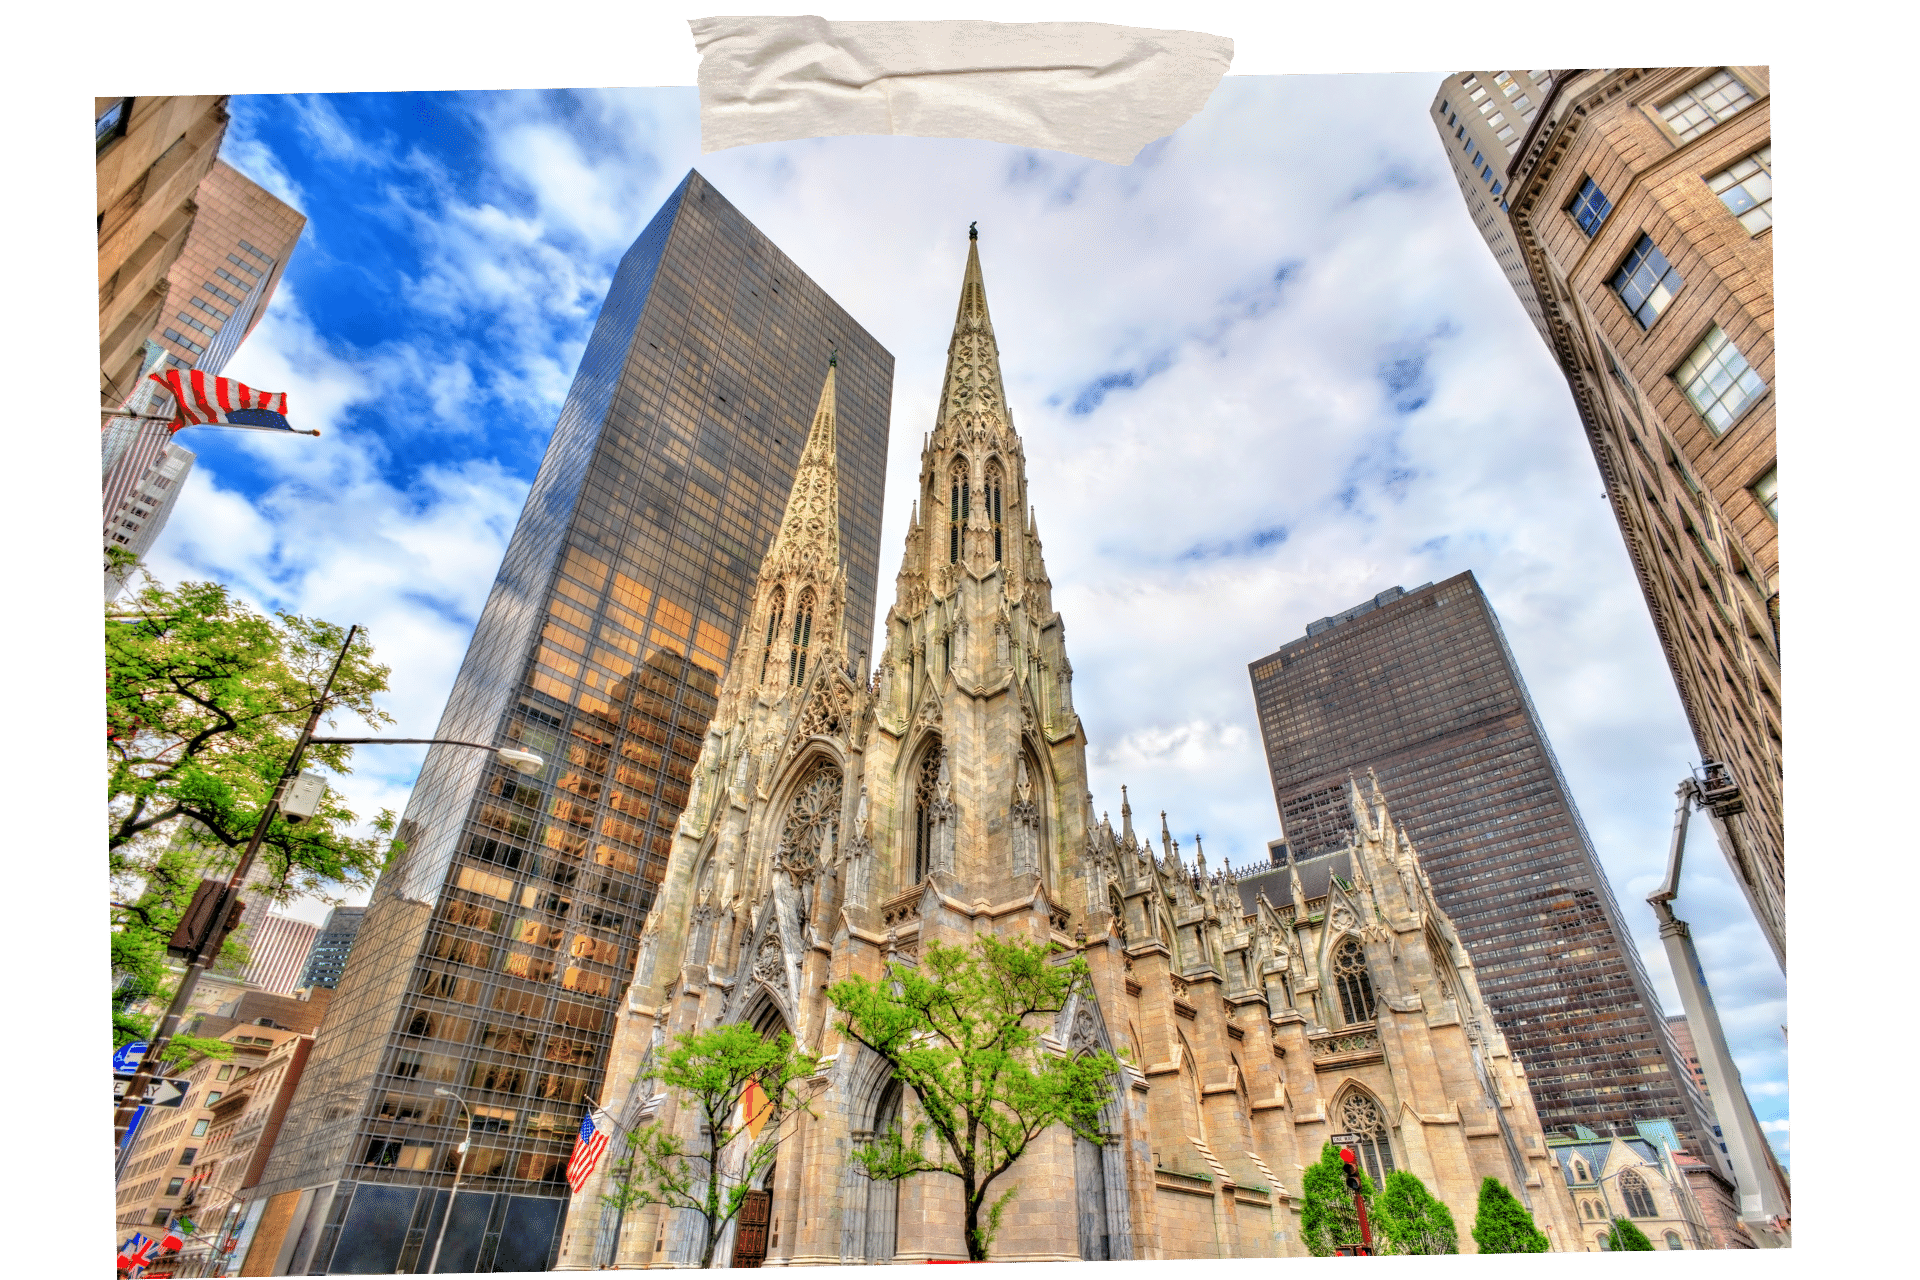 St Patrick's Cathedral is one of the must-visit historic sites in NYC. Image shows the Gothic facade of the cathedral from ground level, with two spires reaching up into the sky. Metal and glass skyscrapers surrounding the building on all sides.